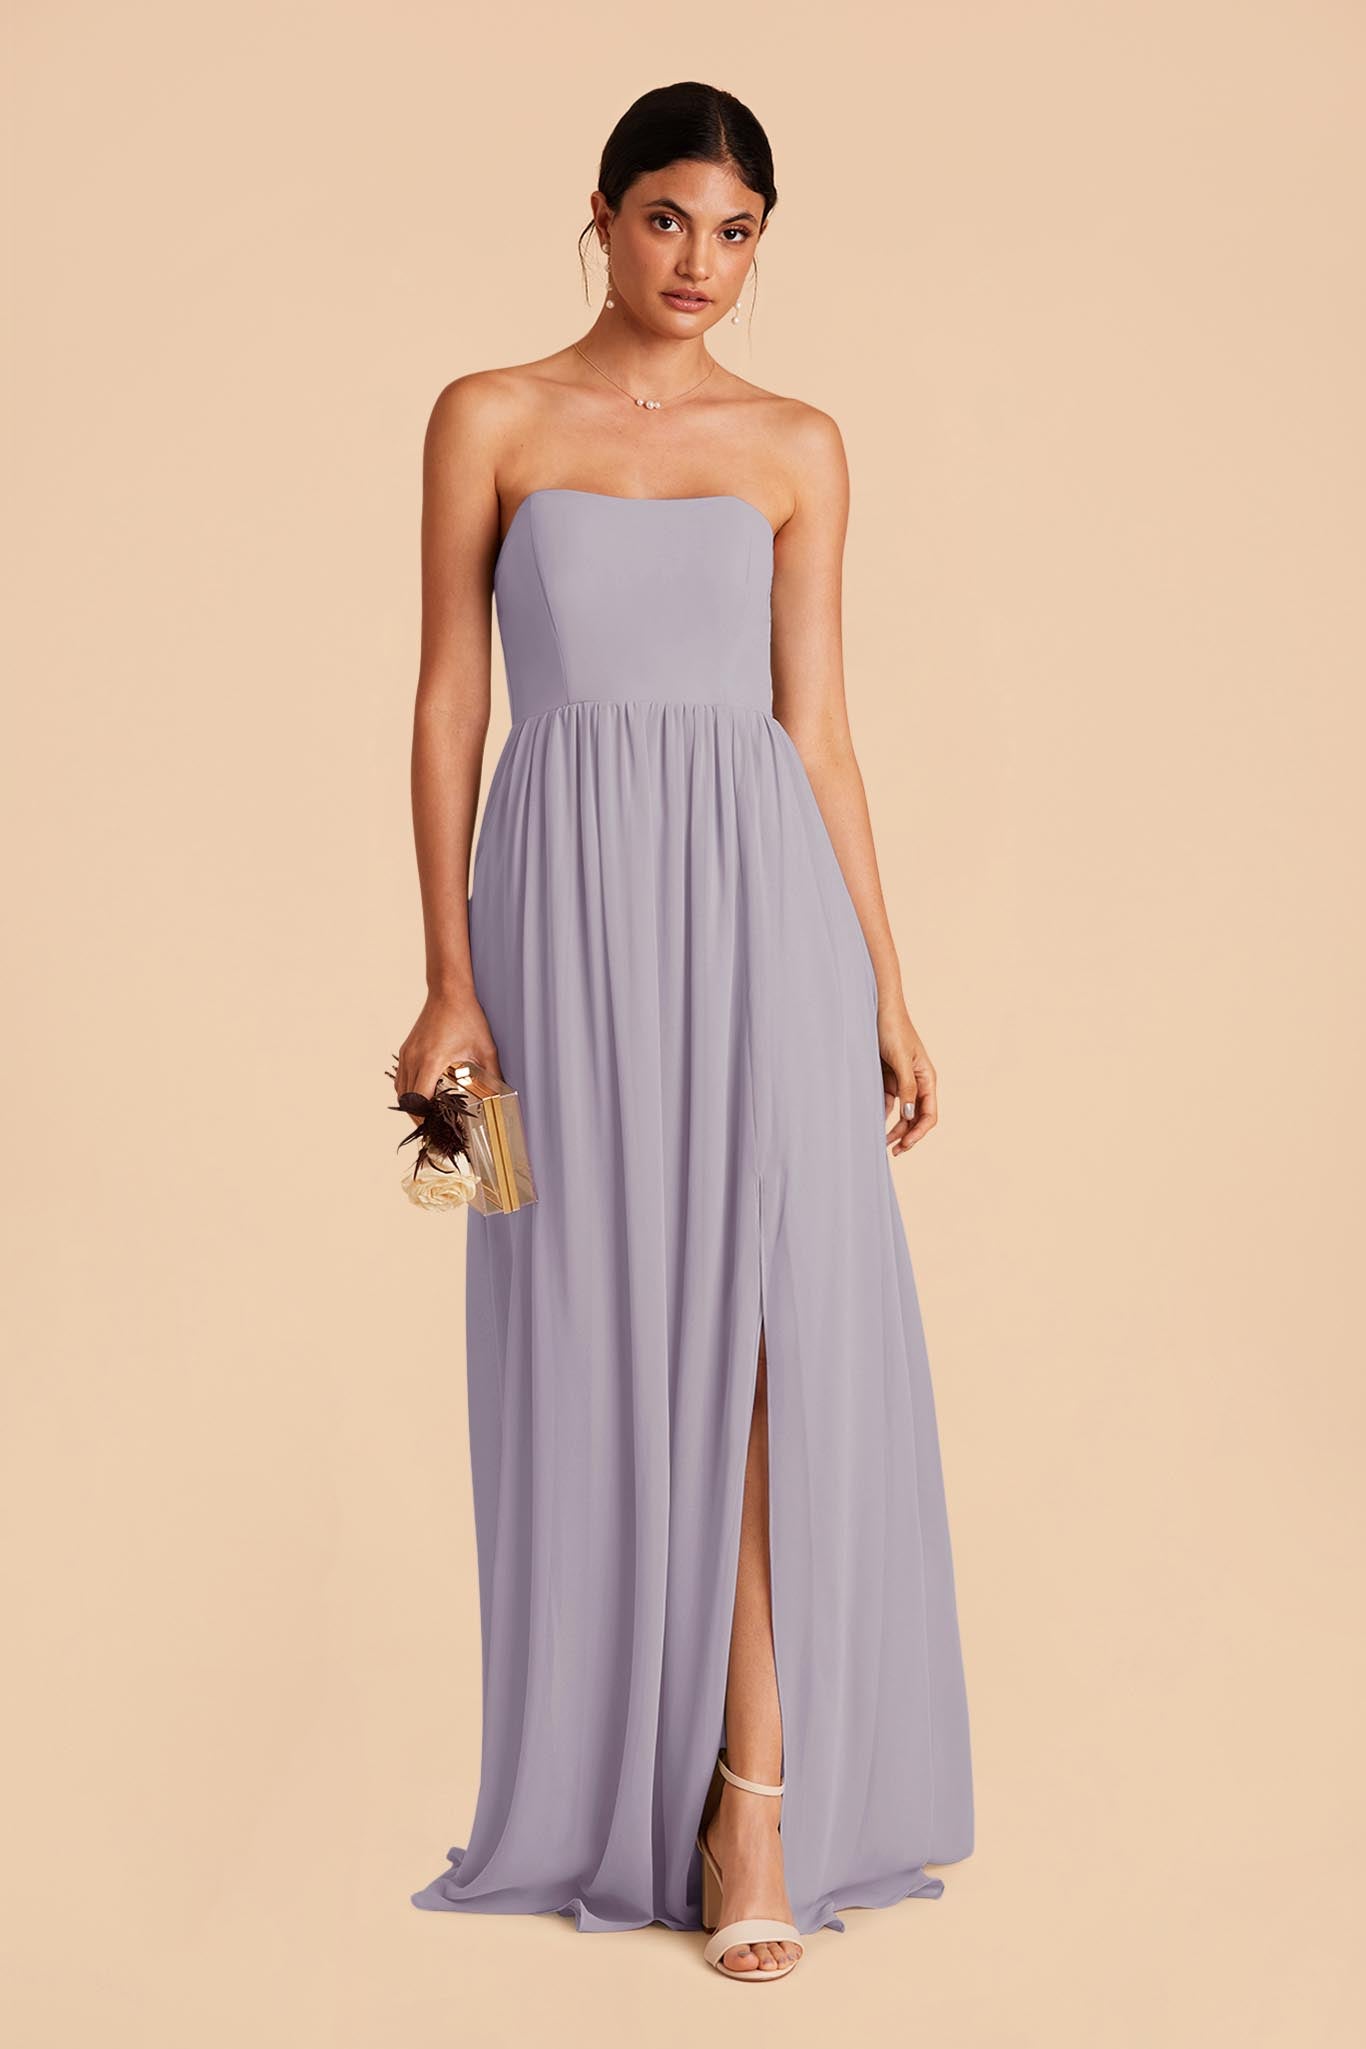 Dusty Lilac August Convertible Dress by Birdy Grey